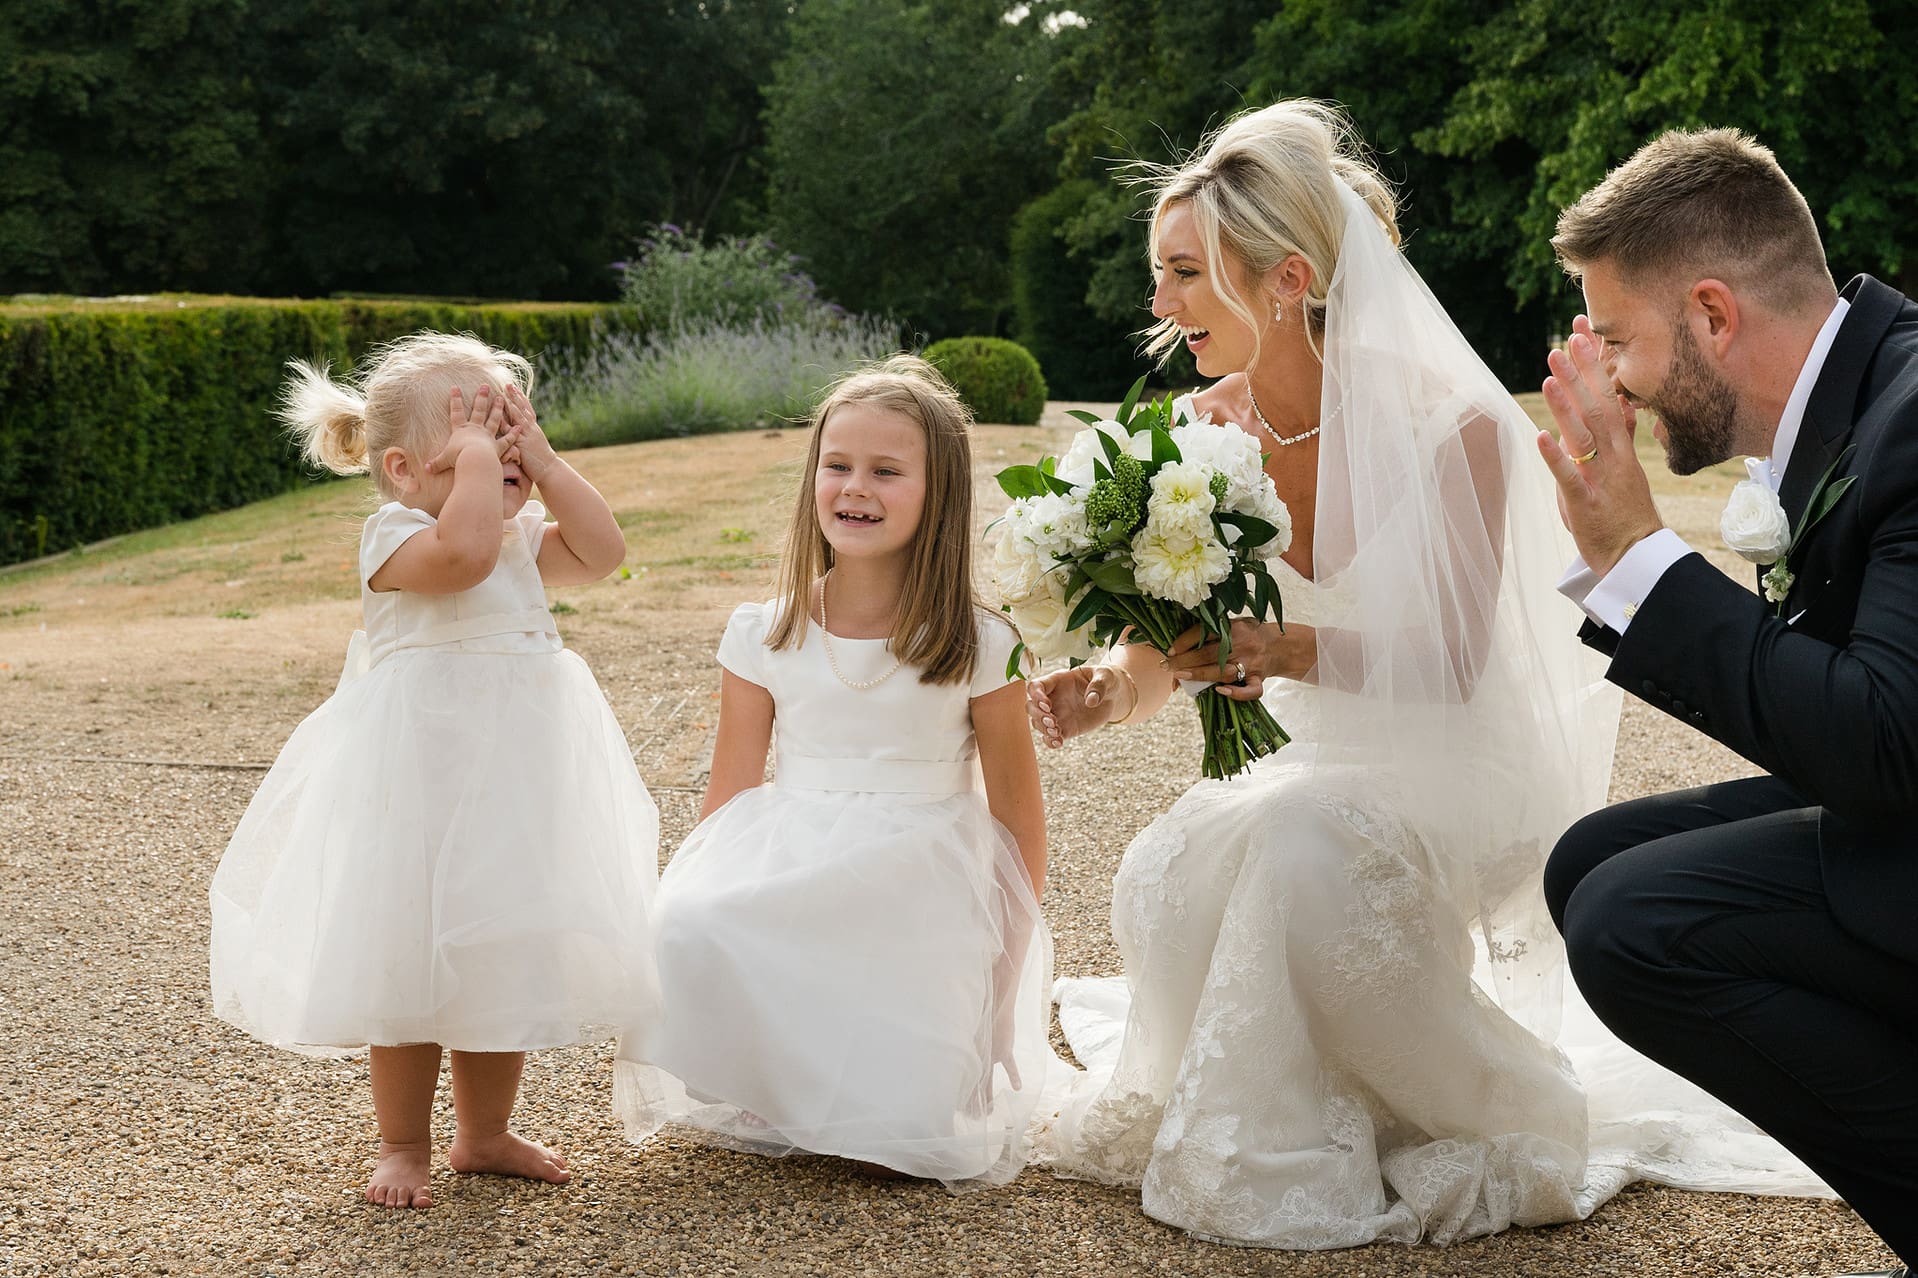 Bride and groom playing peekaboo with a young flower girl